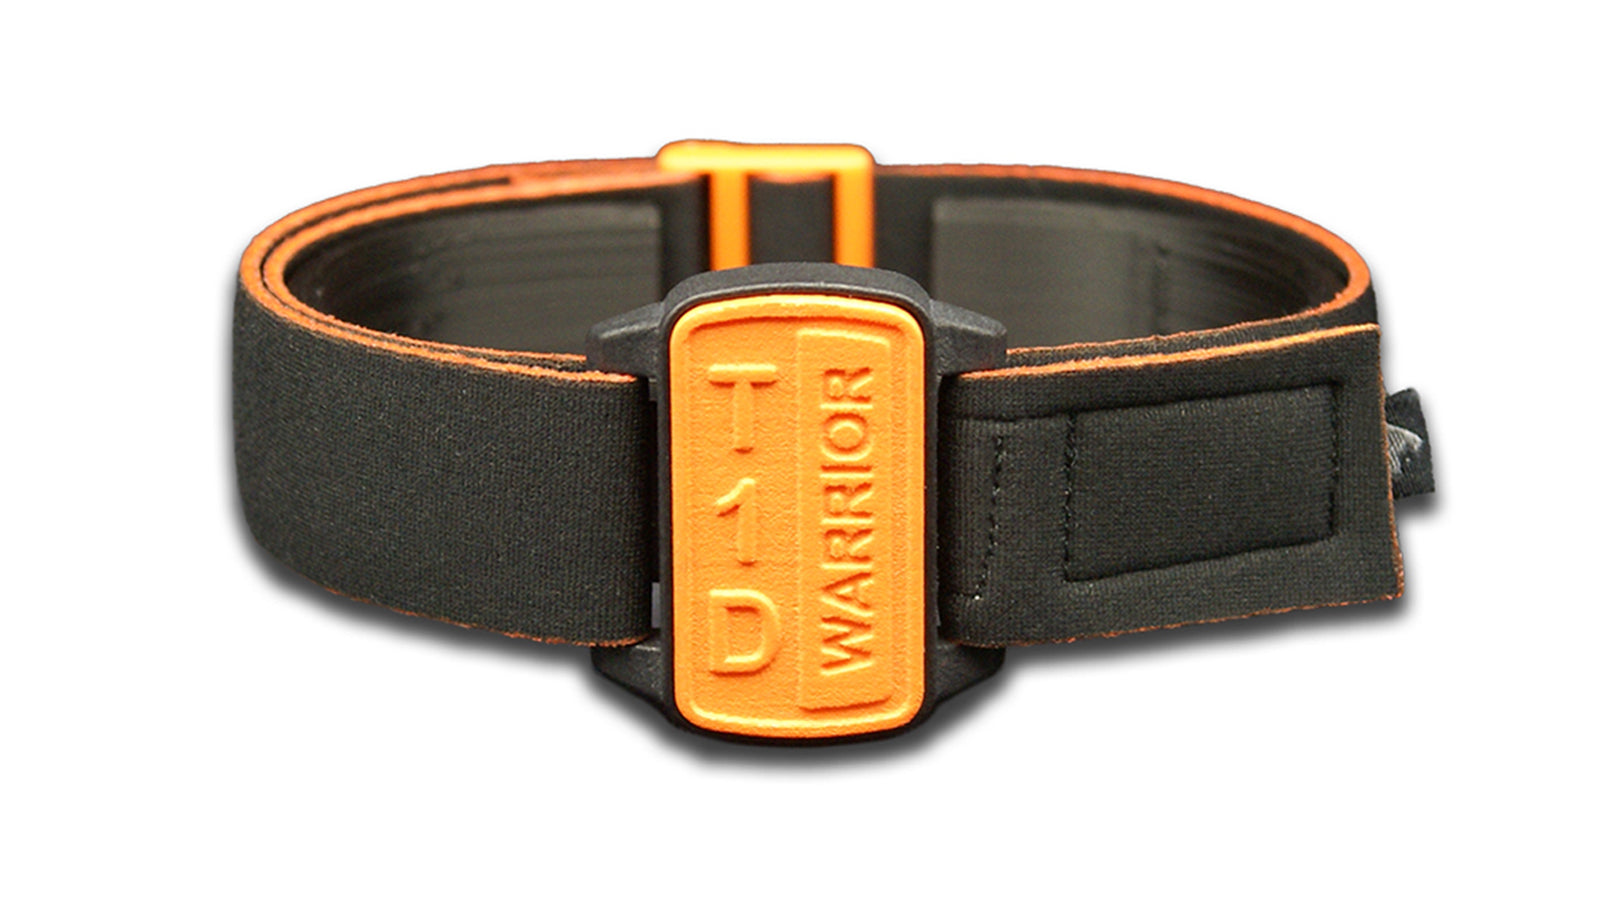 Dexband armband cover in orange with motif T1D Warrior. Black strap edged in coordinating orange. 